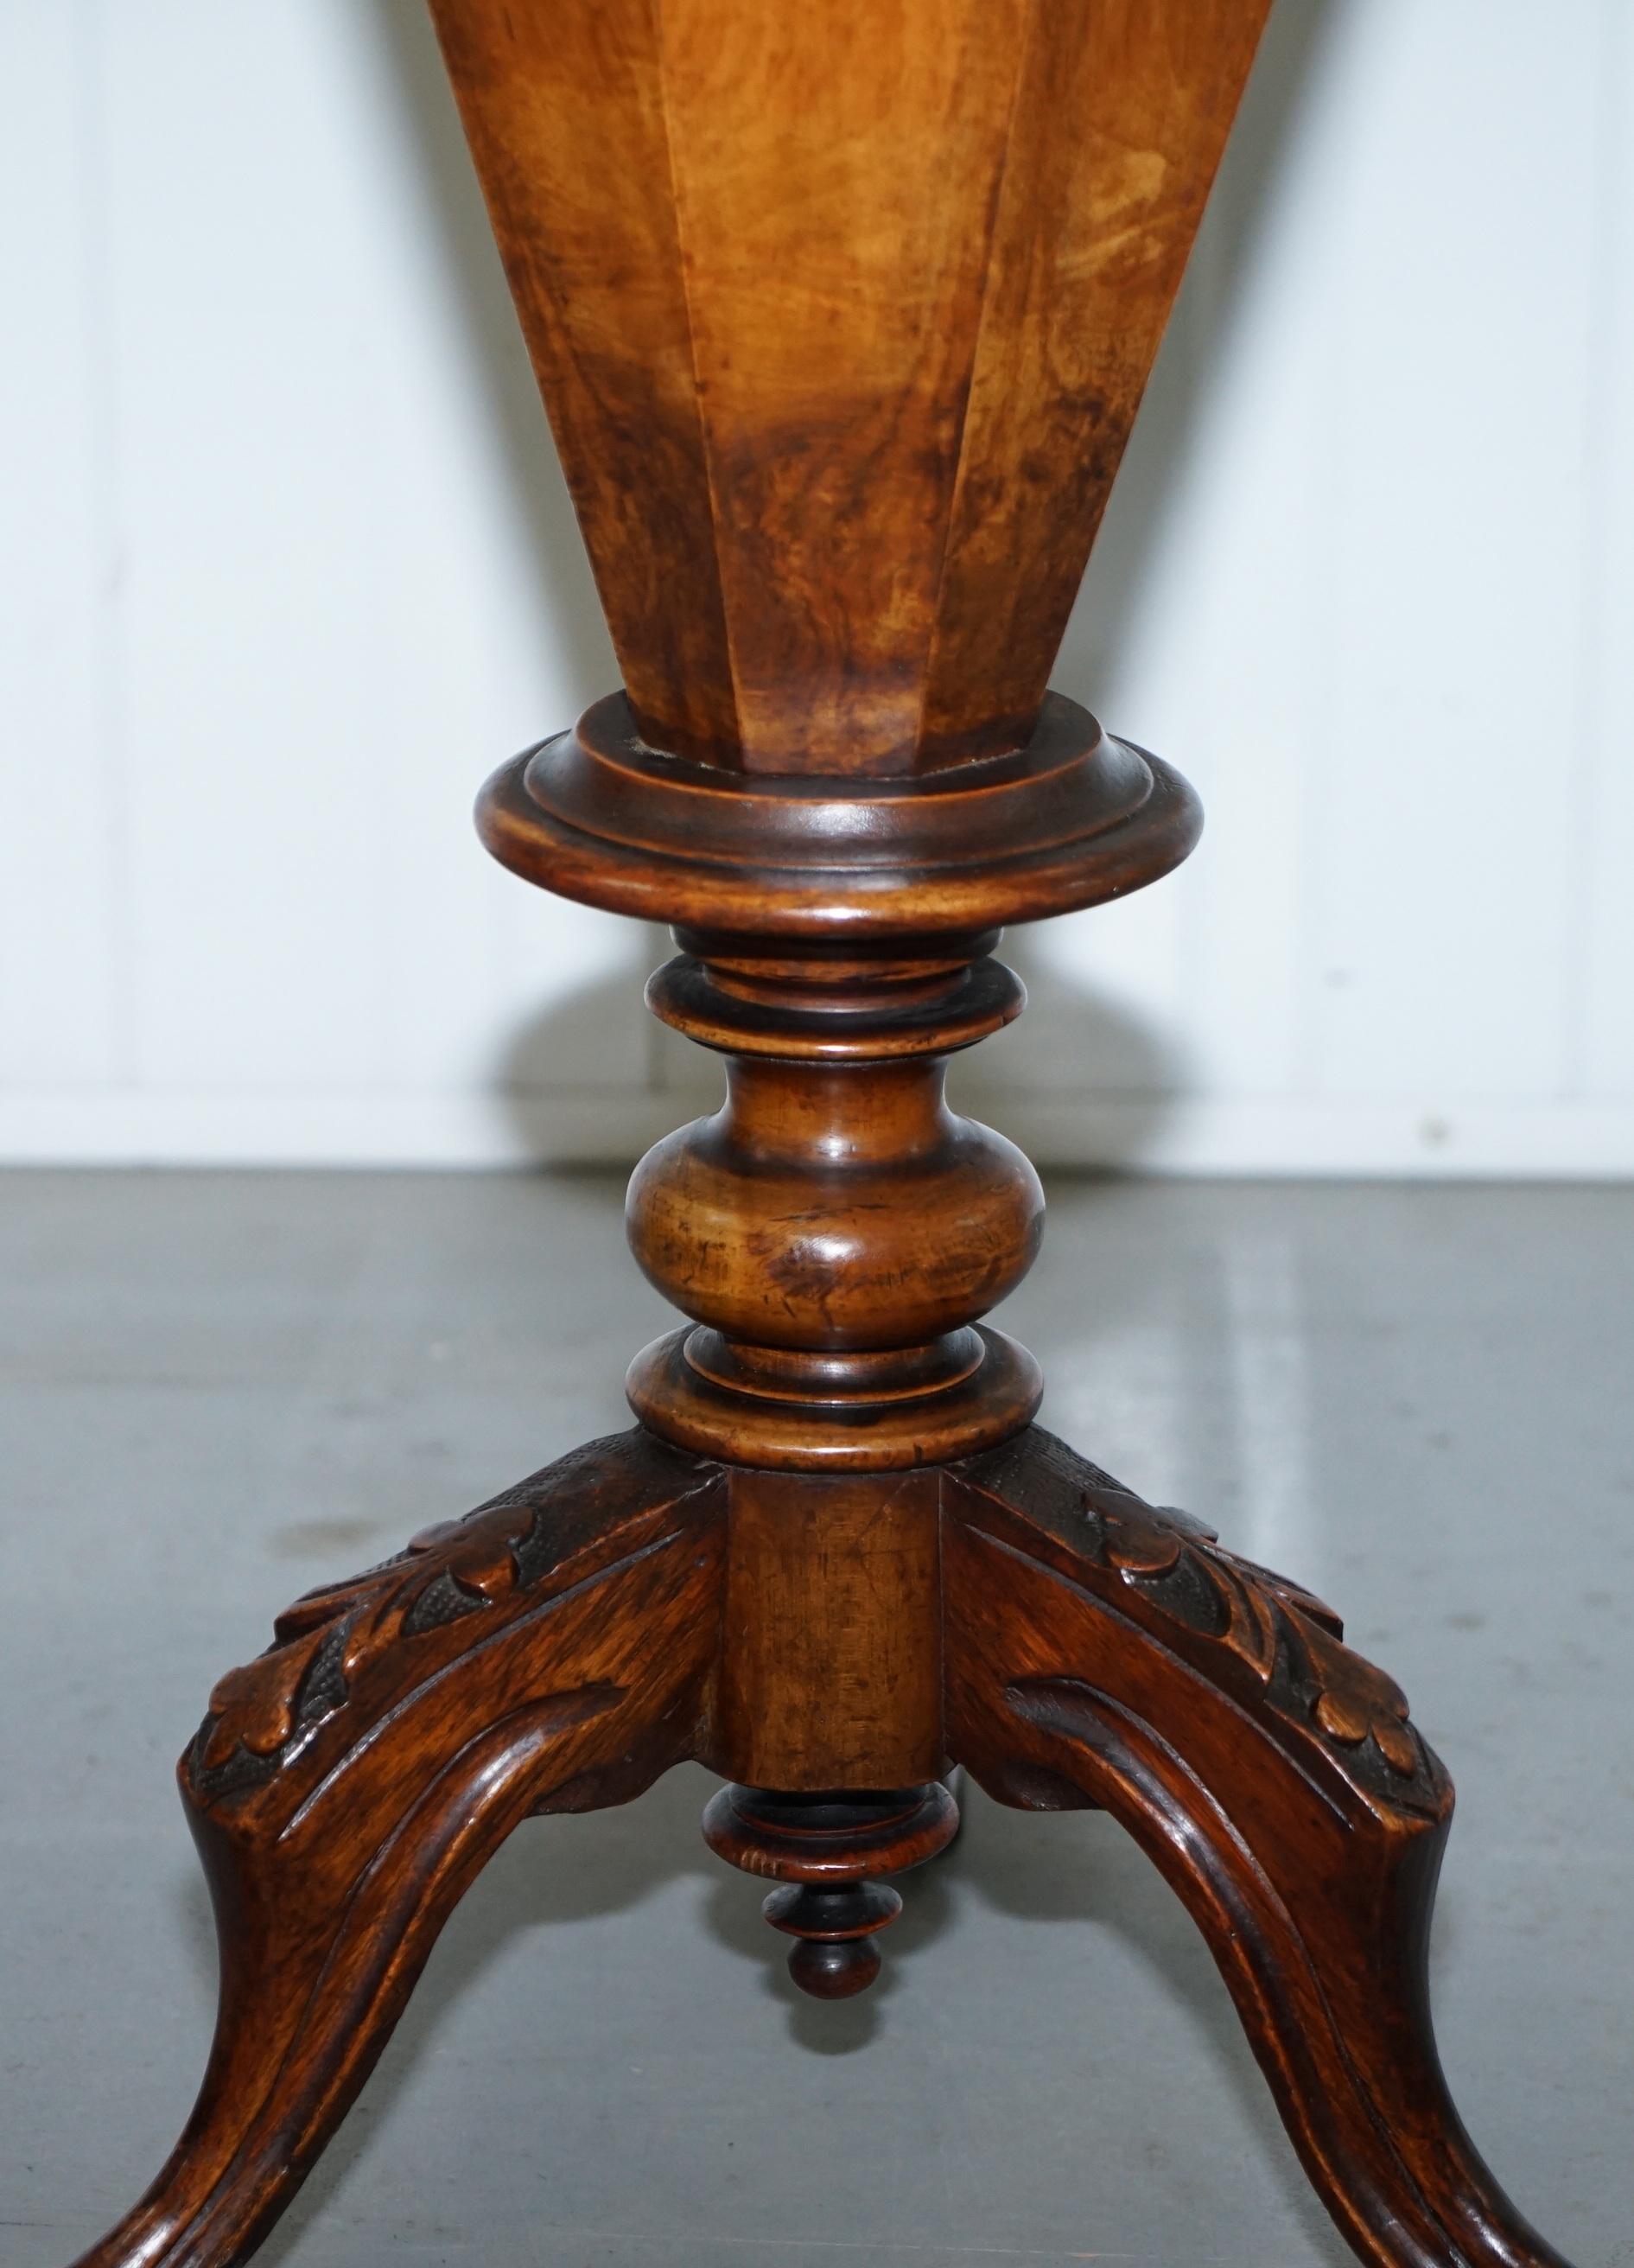 Stunning Burr Walnut Victorian Sewing or Work Box Great as Side Lamp End Table 13